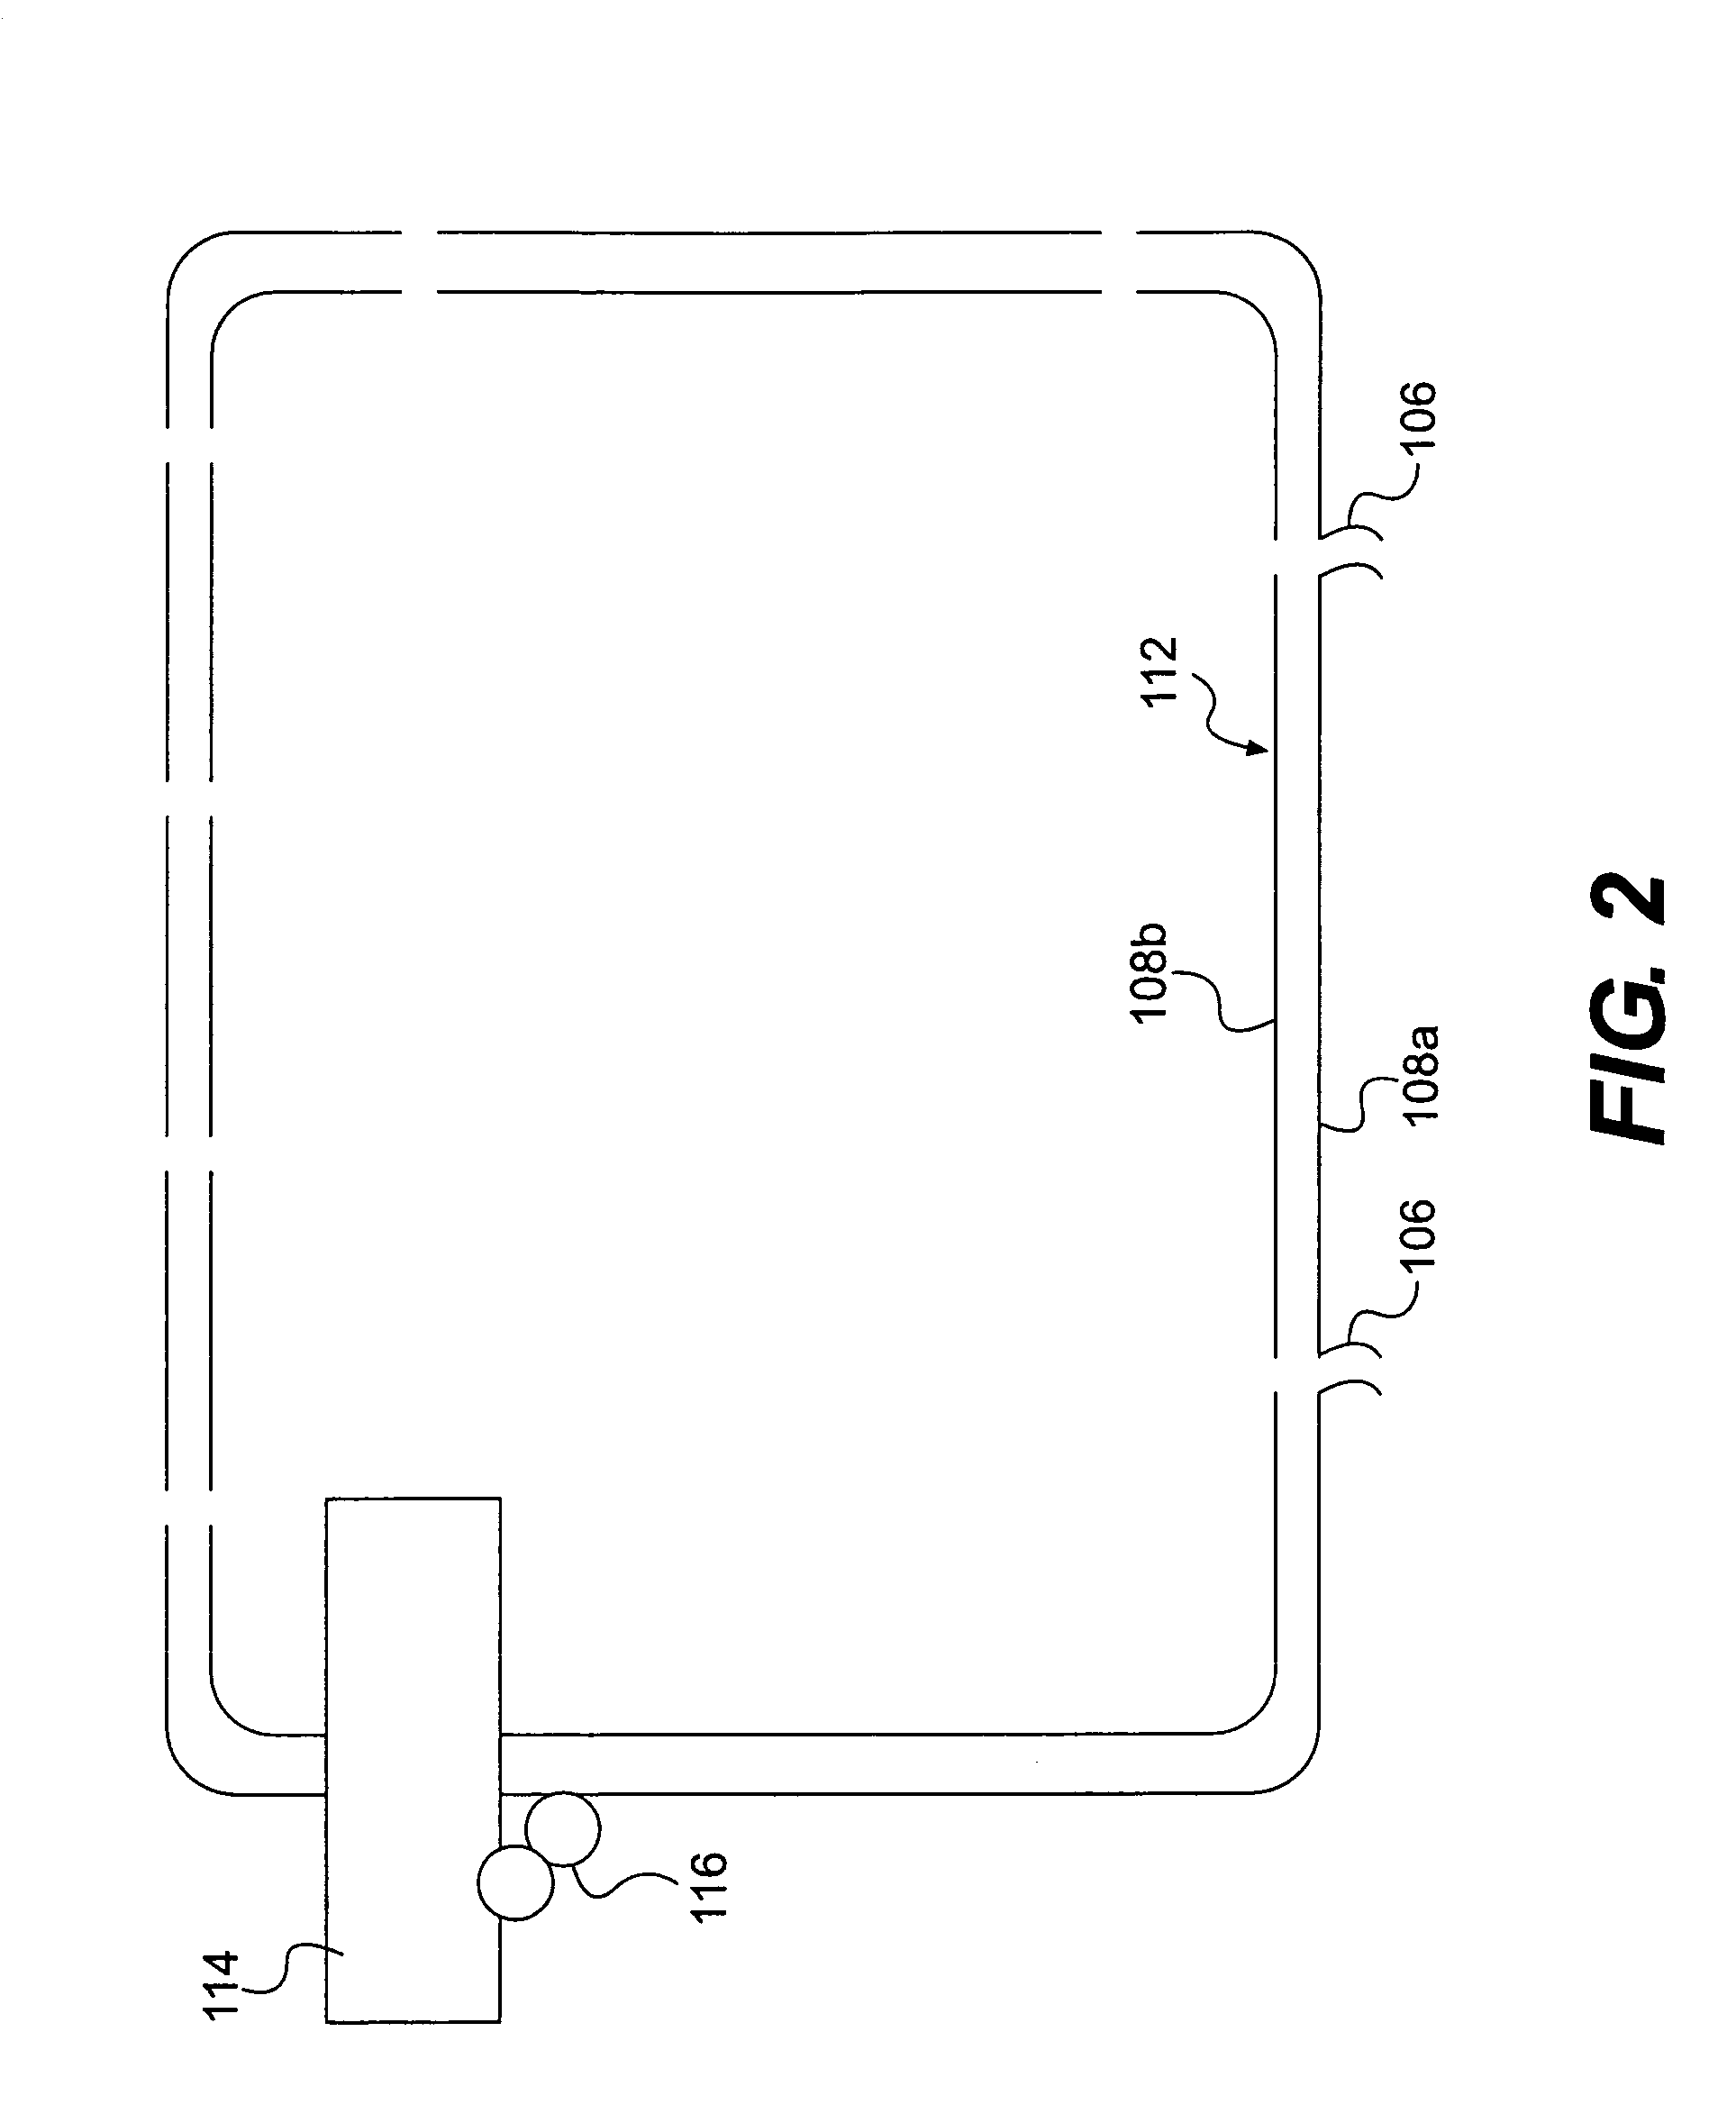 Single pass sequencer and method of use